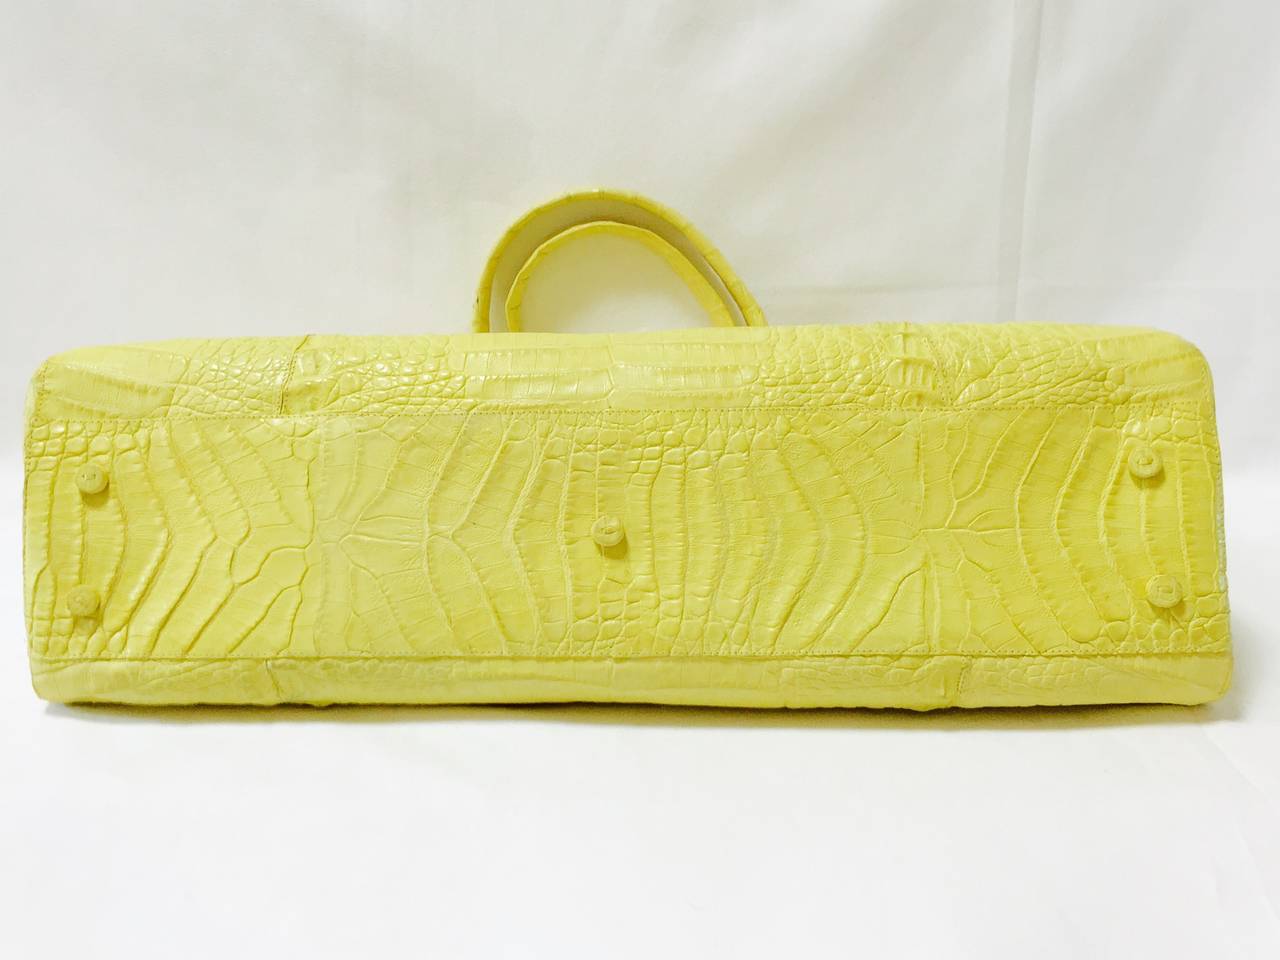 Exquisite Citrus Yellow Crocodile Shoulder Bag shows why designs by Nancy Gonzalez have become highly collectible worldwide!  Features supple crocodile in a most delicious shade of yellow.  Double shoulder straps, magnetic closures and crocodile